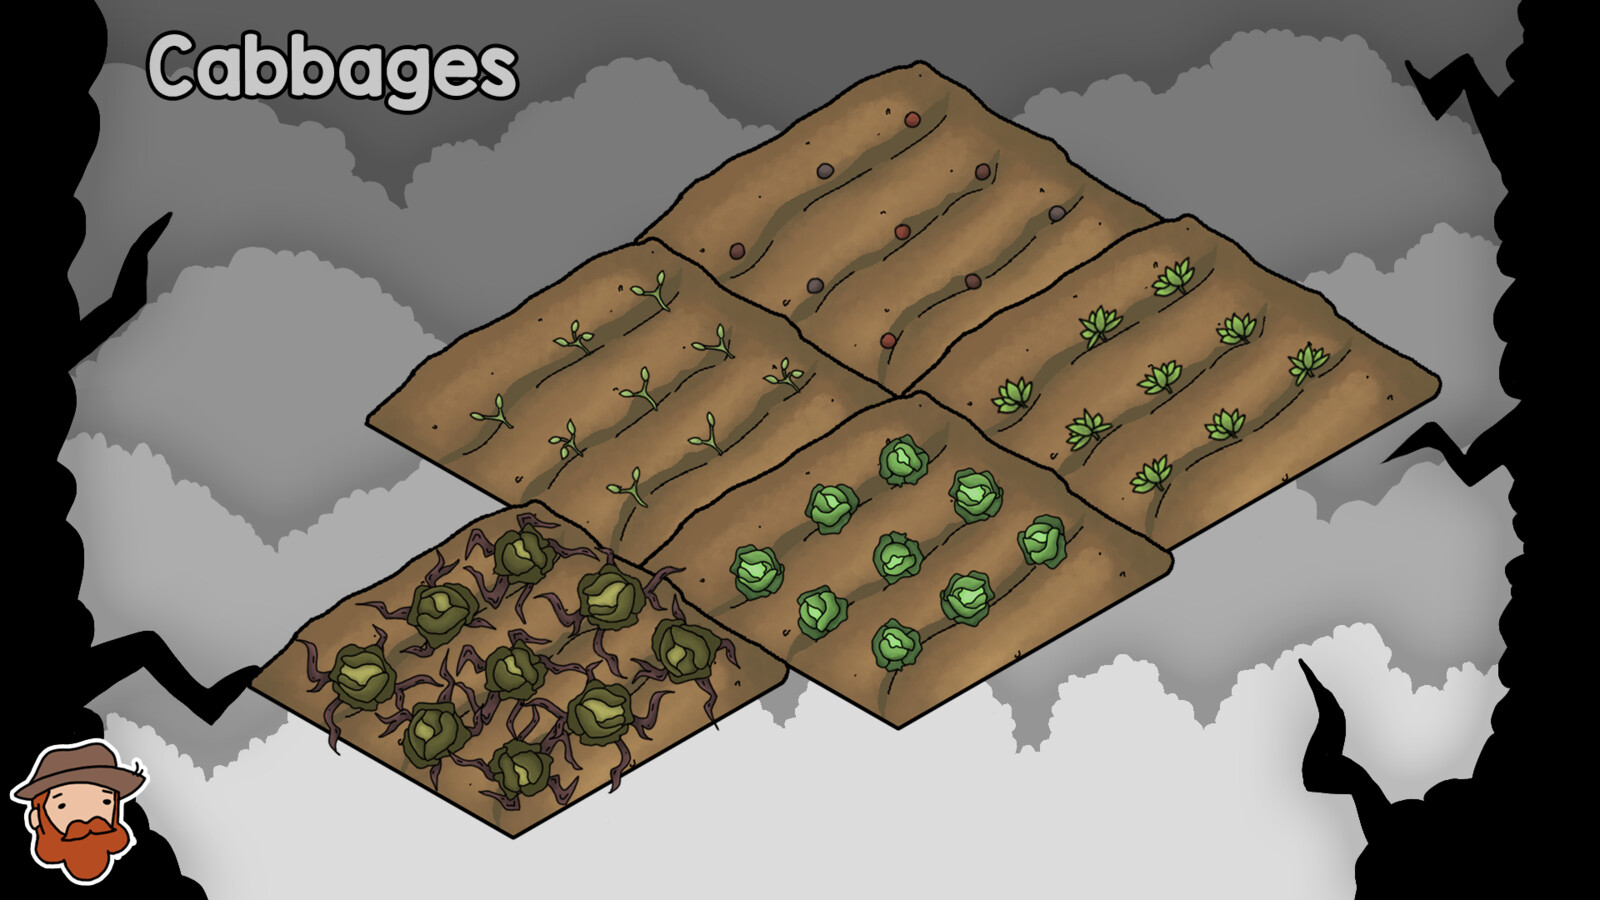 All stages of Cabbages